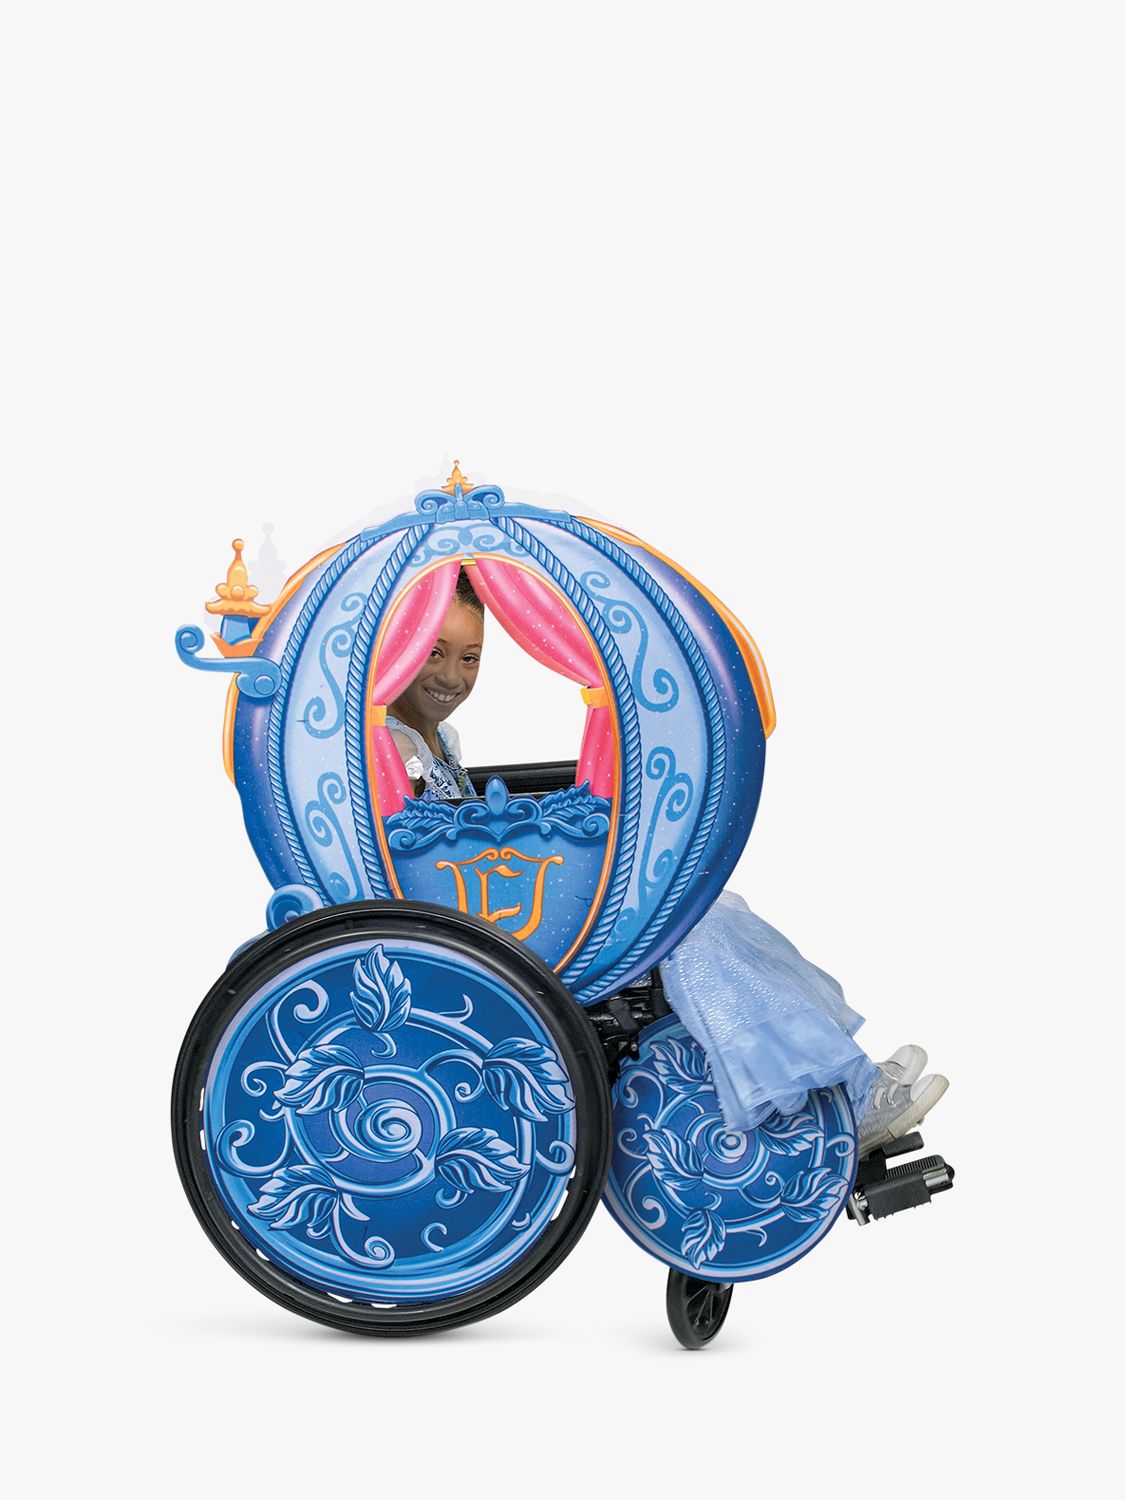 Buy Disney Princess Carriage Adaptive Wheel Chair Cover, Blue/Multi Online at johnlewis.com